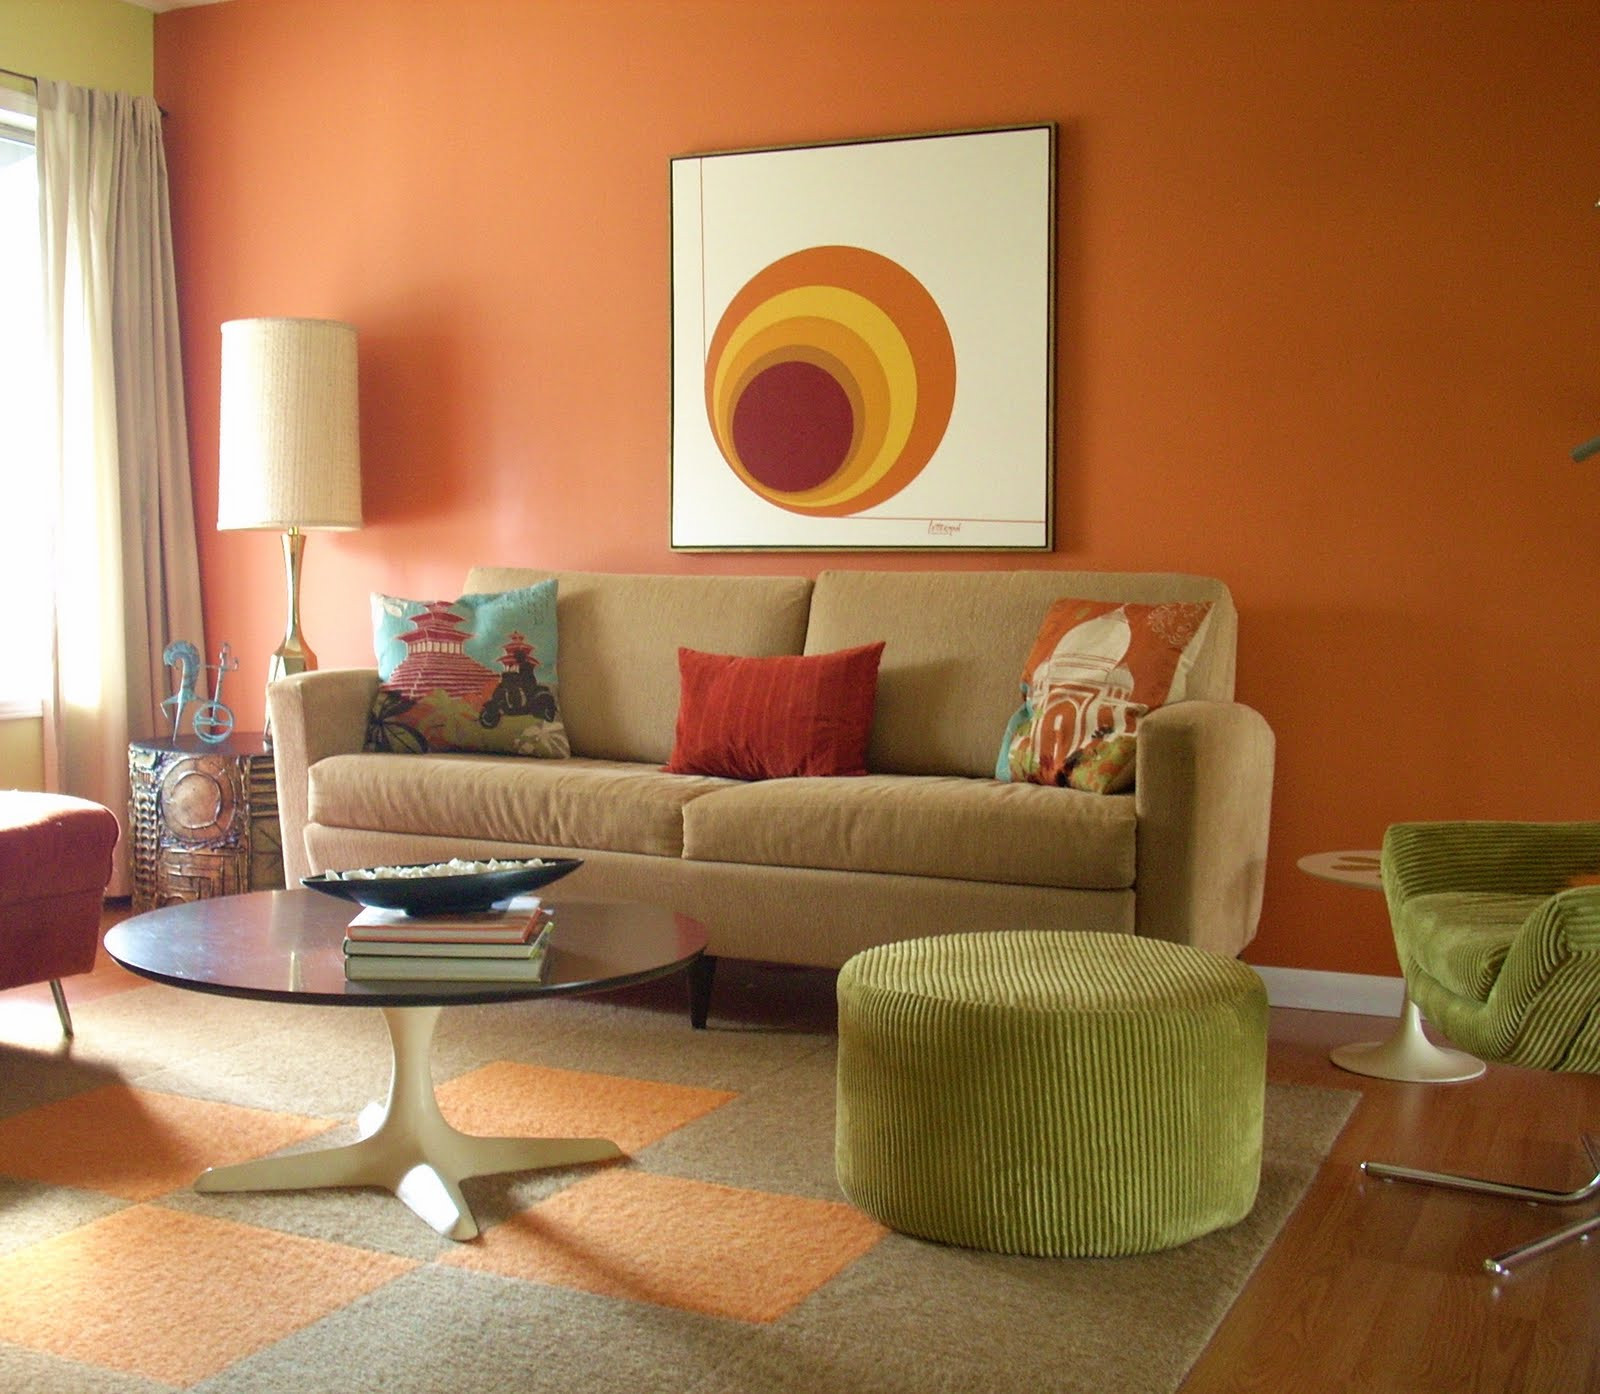 Living Room Wall Paint Colors
 Newly Wed Tips to Décor Your New Home